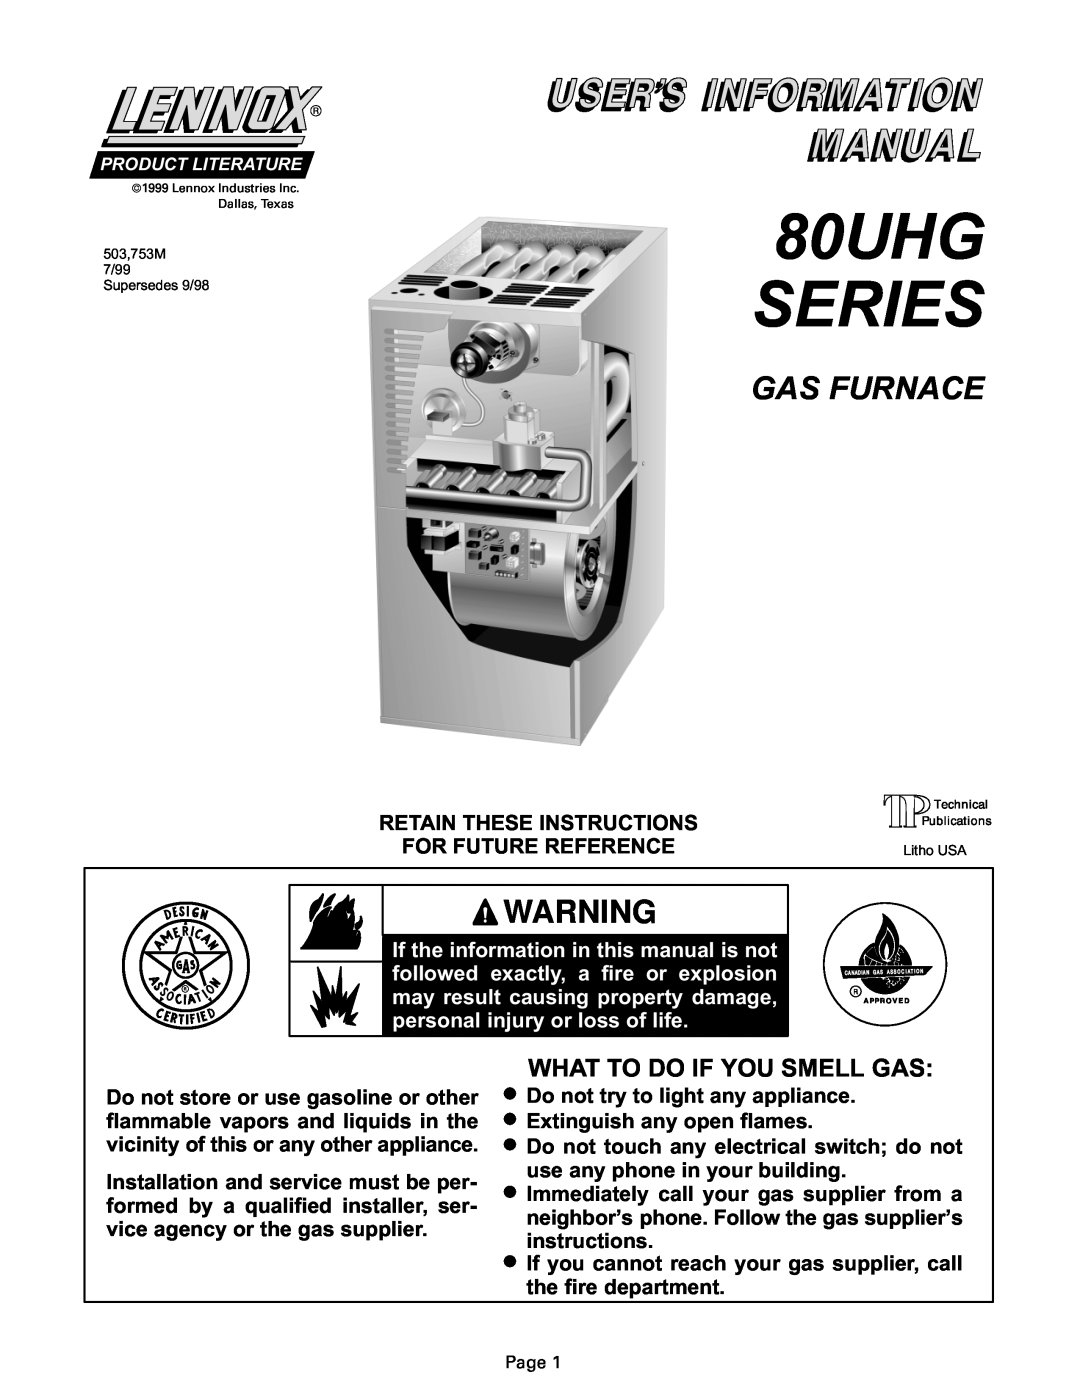 Lennox International Inc manual 80UHG SERIES, Gas Furnace, What To Do If You Smell Gas 